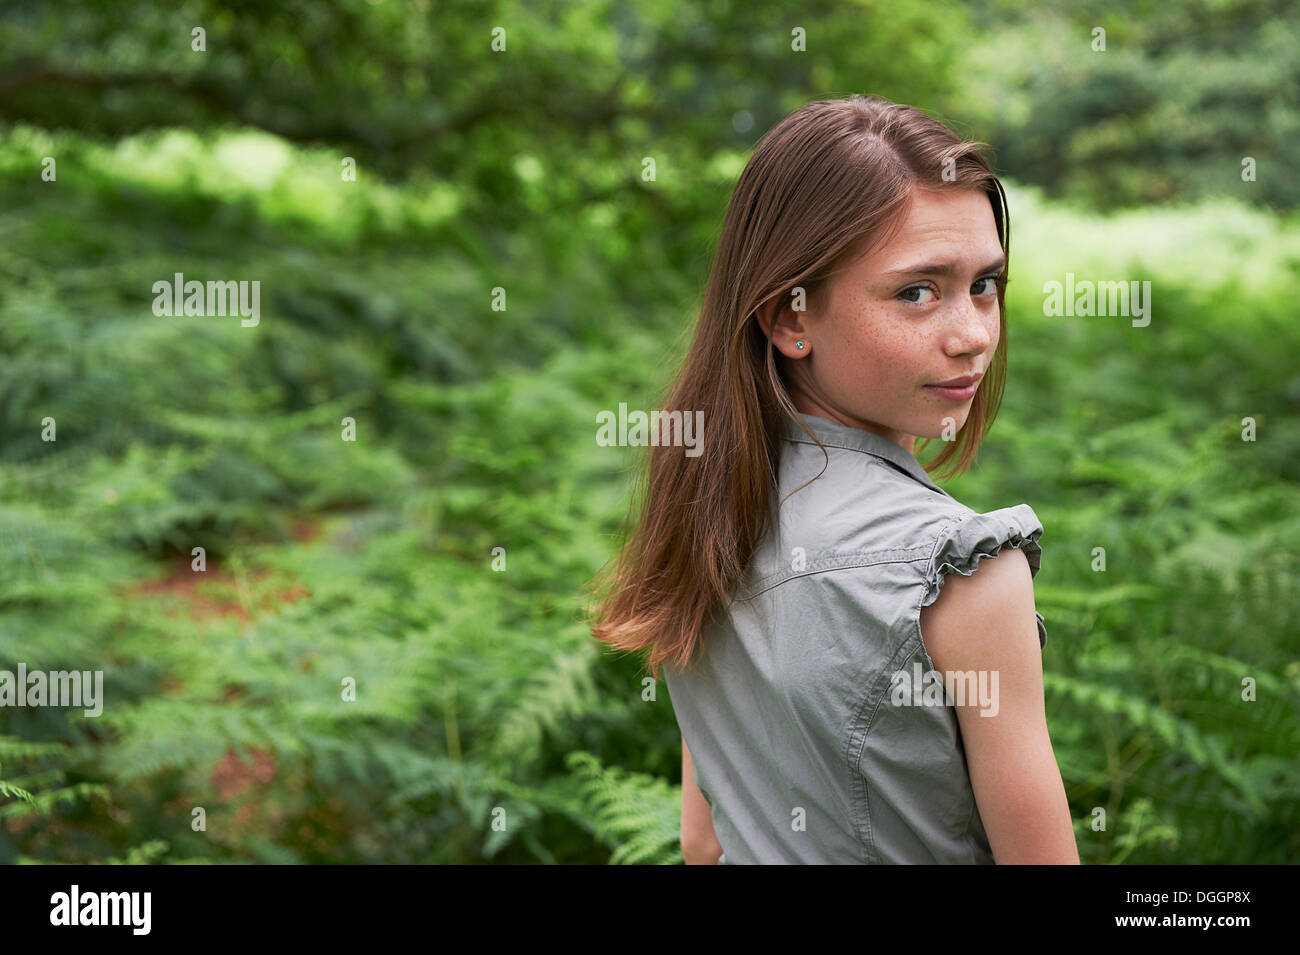 Teenage girl looking over shoulder in forest Stock Photo